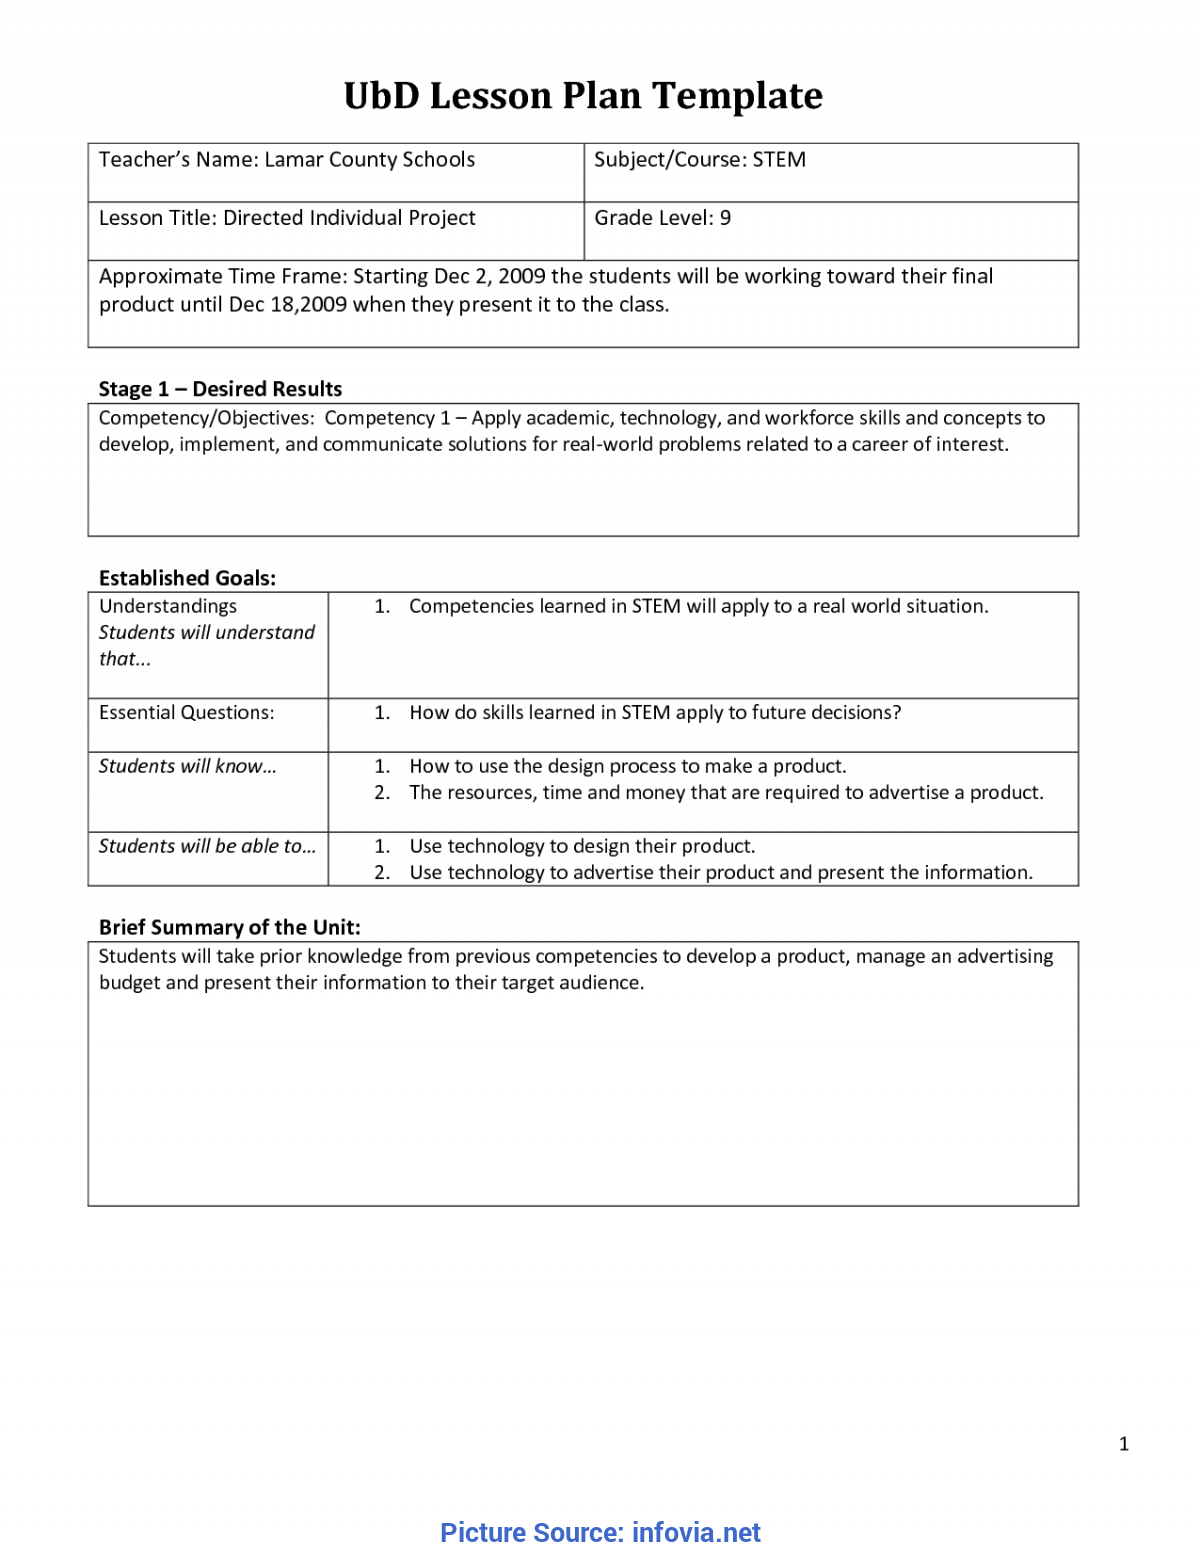 Useful Lesson Plan Template Vic 23 Images Of Ubd Lesson Plan